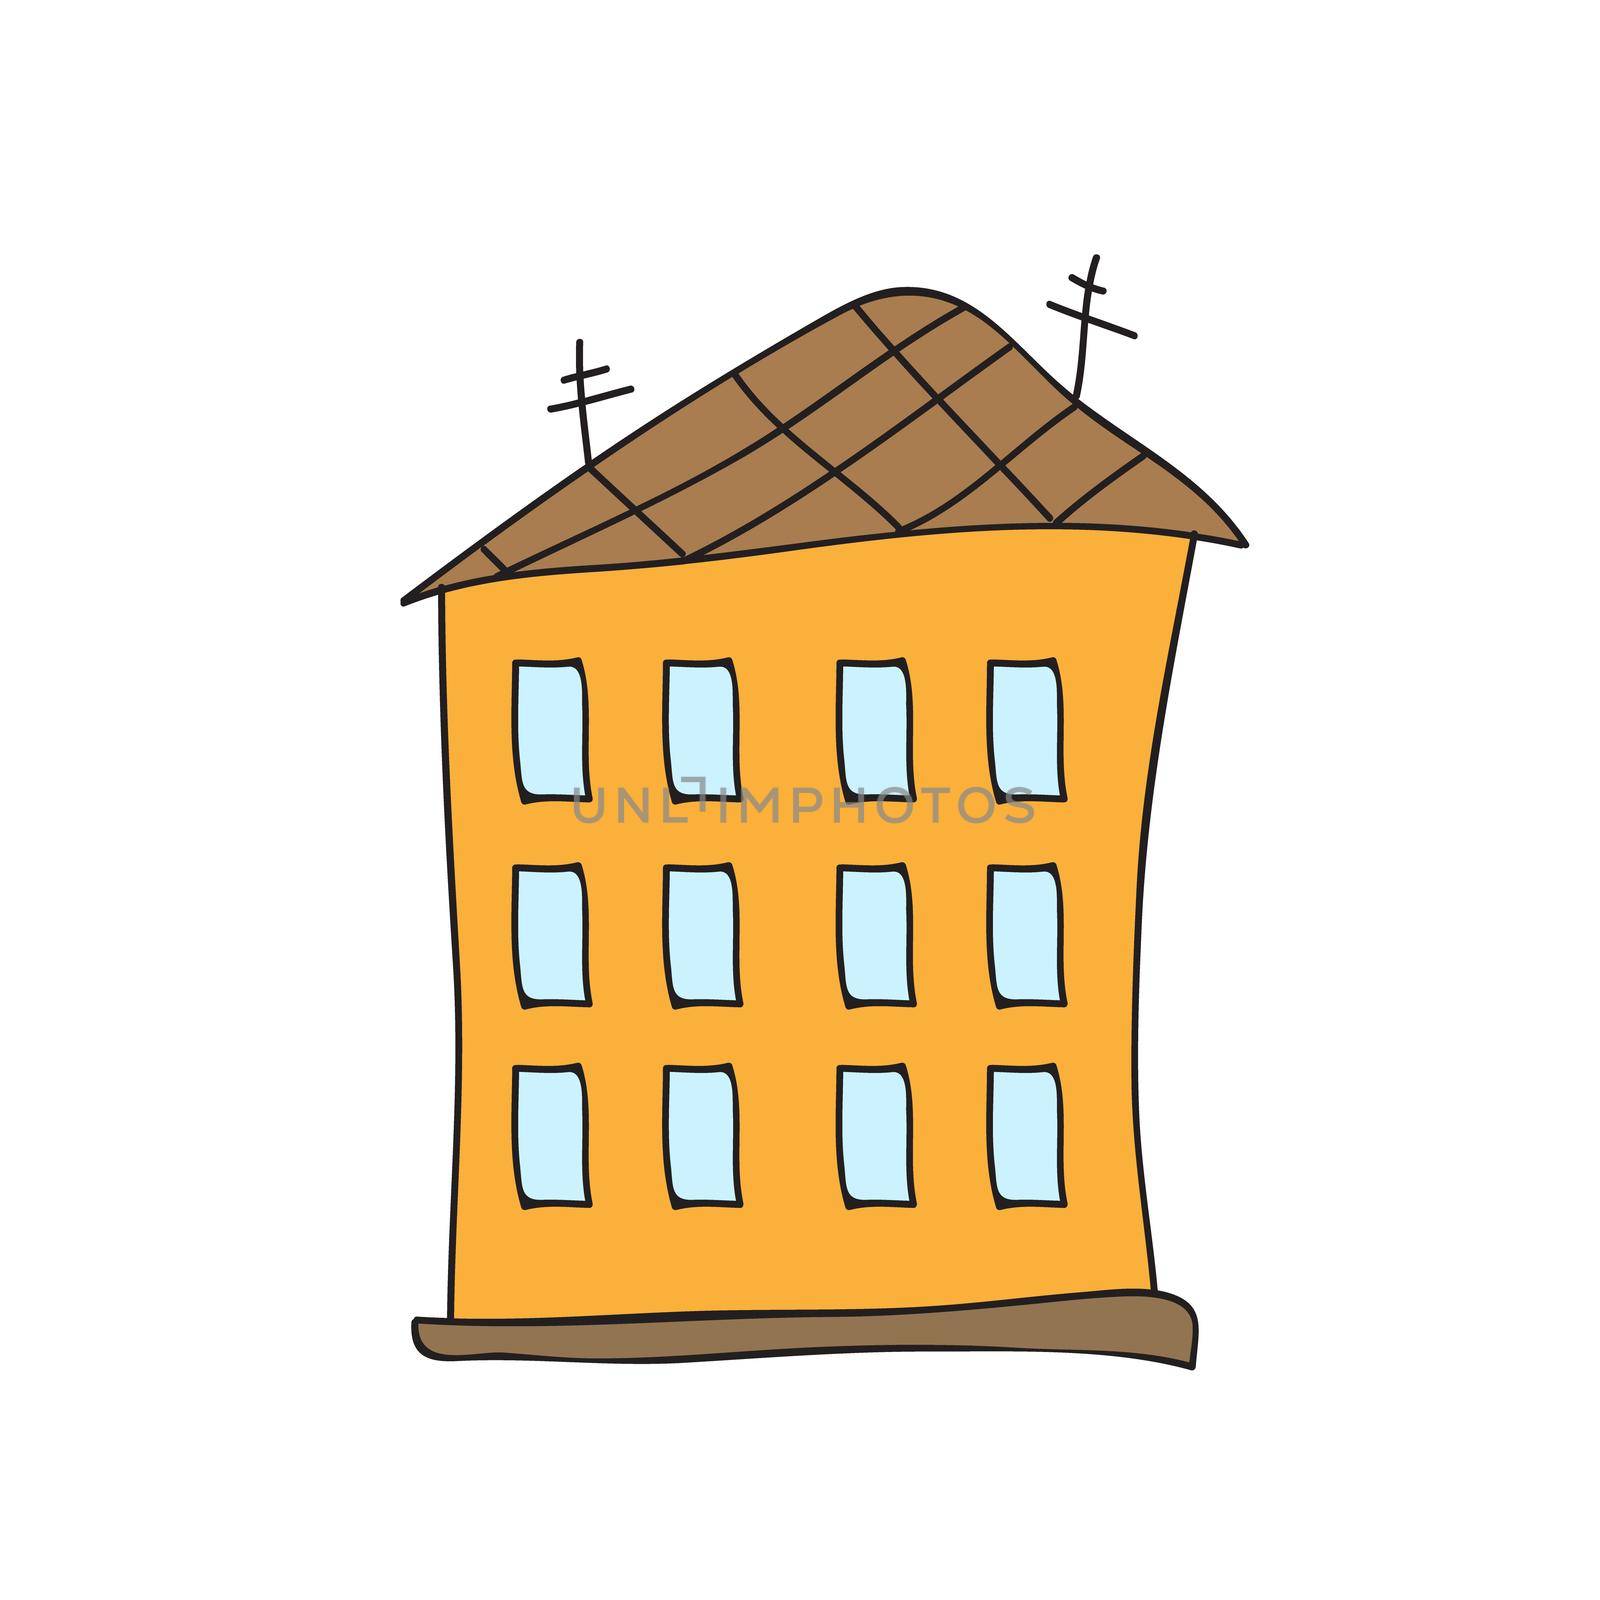 Multi storey building on white background. Simple cartoon town cityscape. Vector illustration.